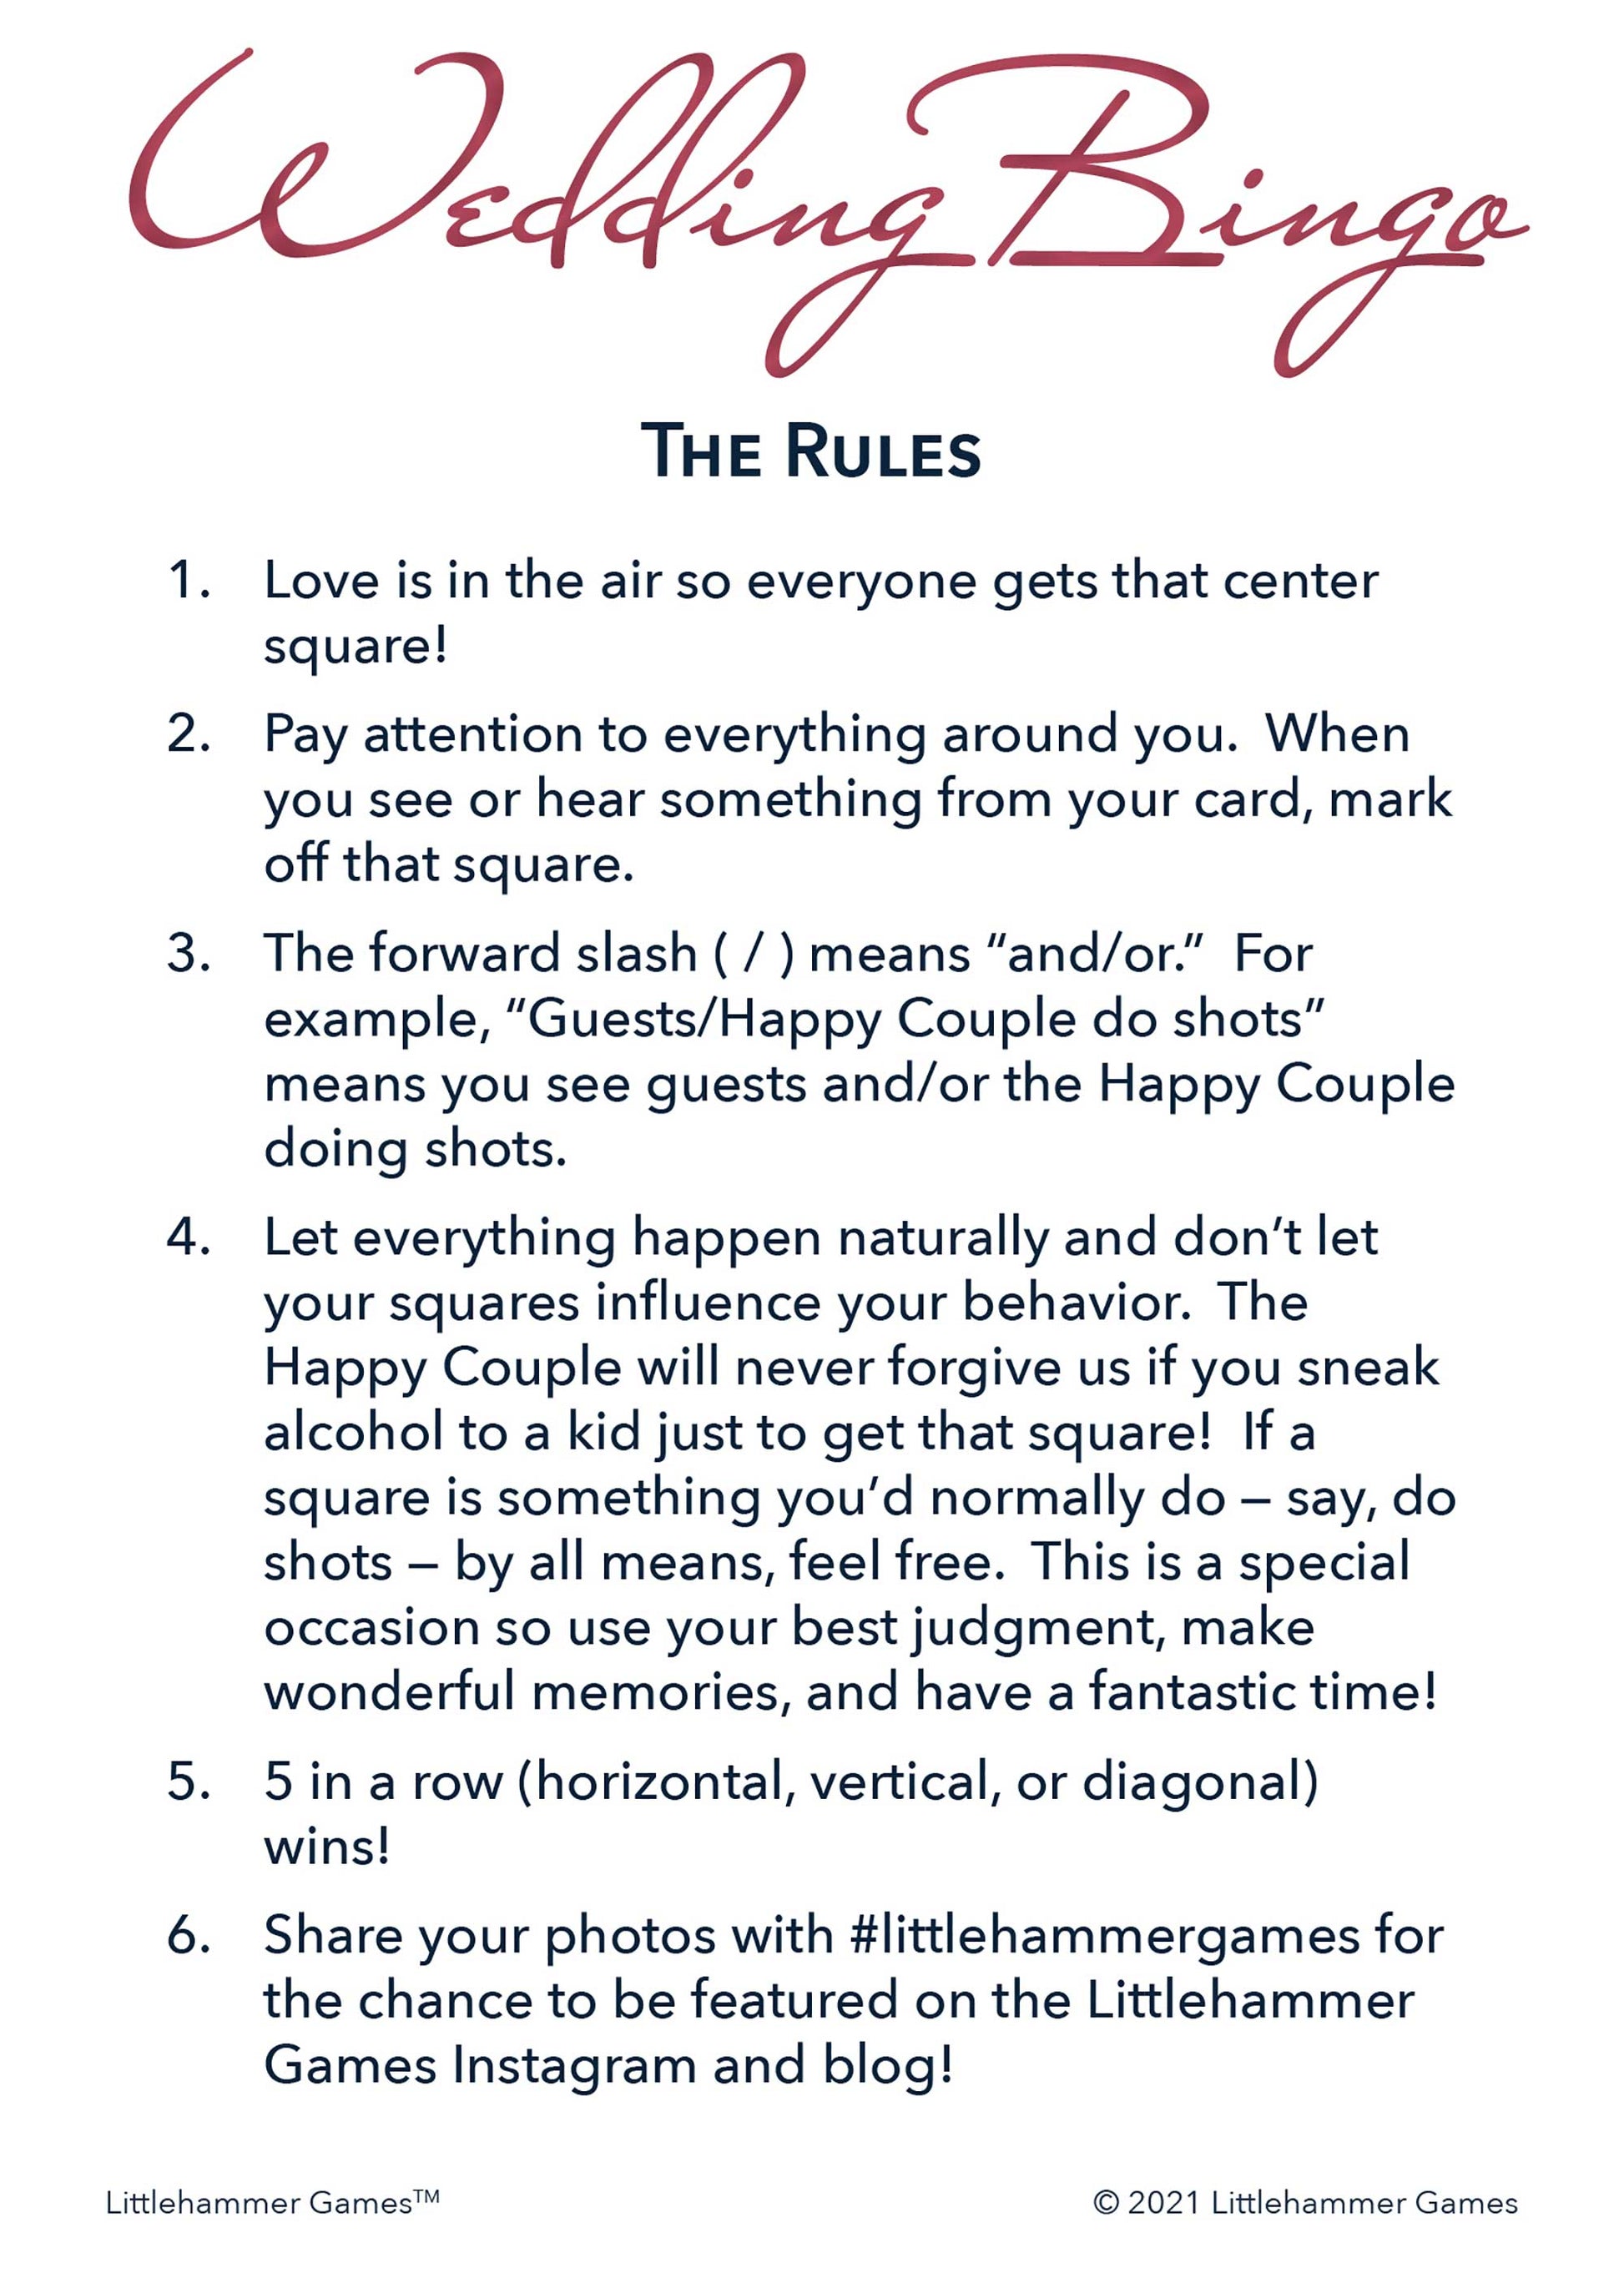 Wedding Bingo rules card on a rose gold and white background